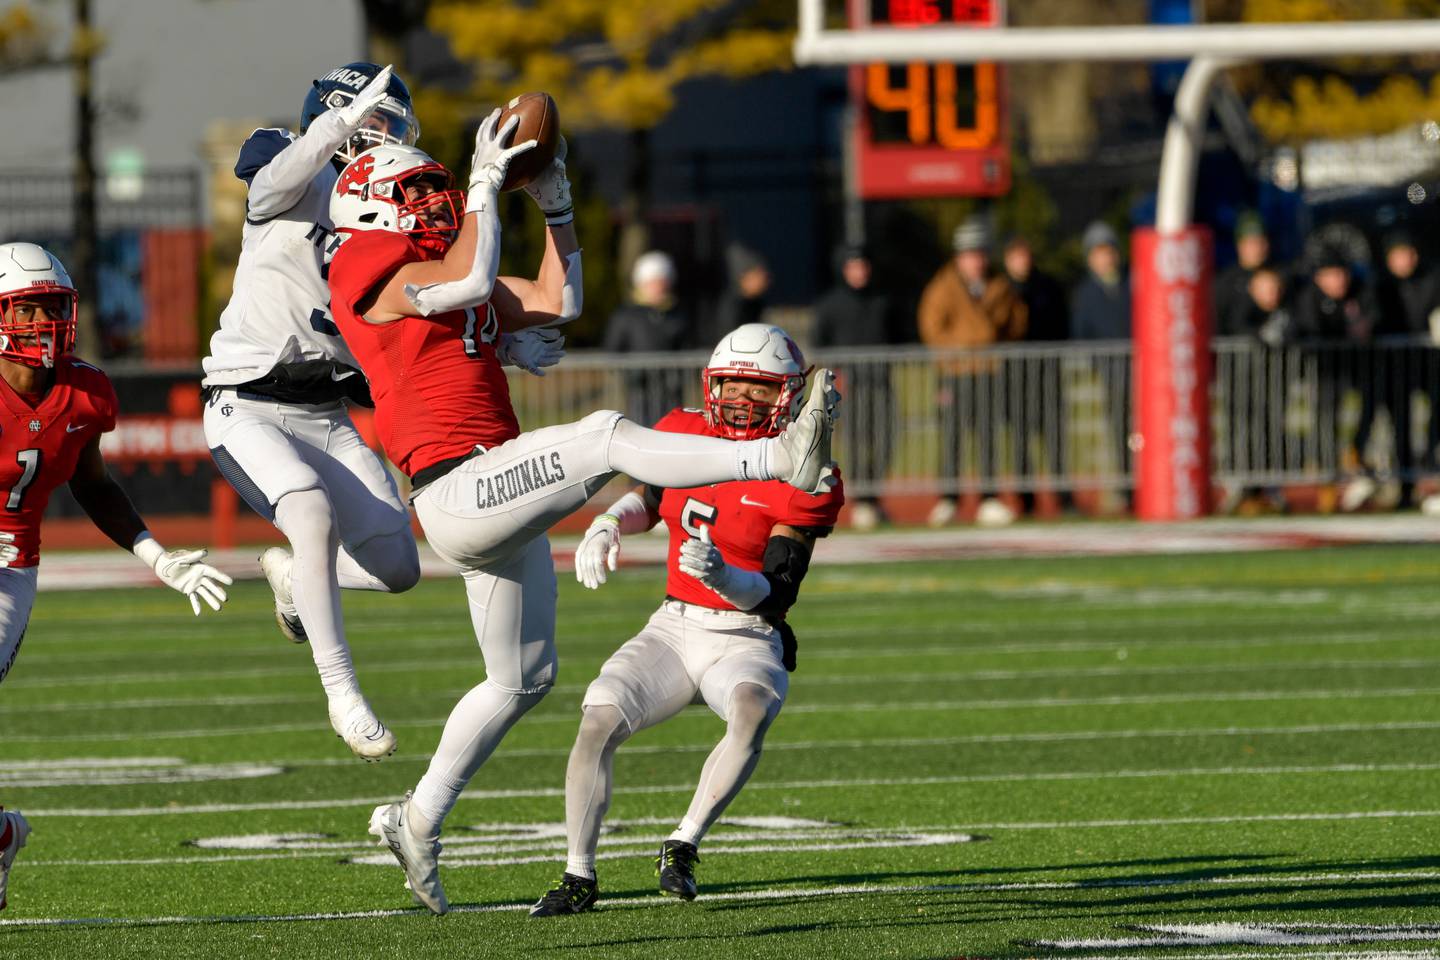 North Central's Sam Taviani (14) makes a play during the Stagg Bowl win over Mount Union for the Division III National Championship on Dec. 16, 2022.